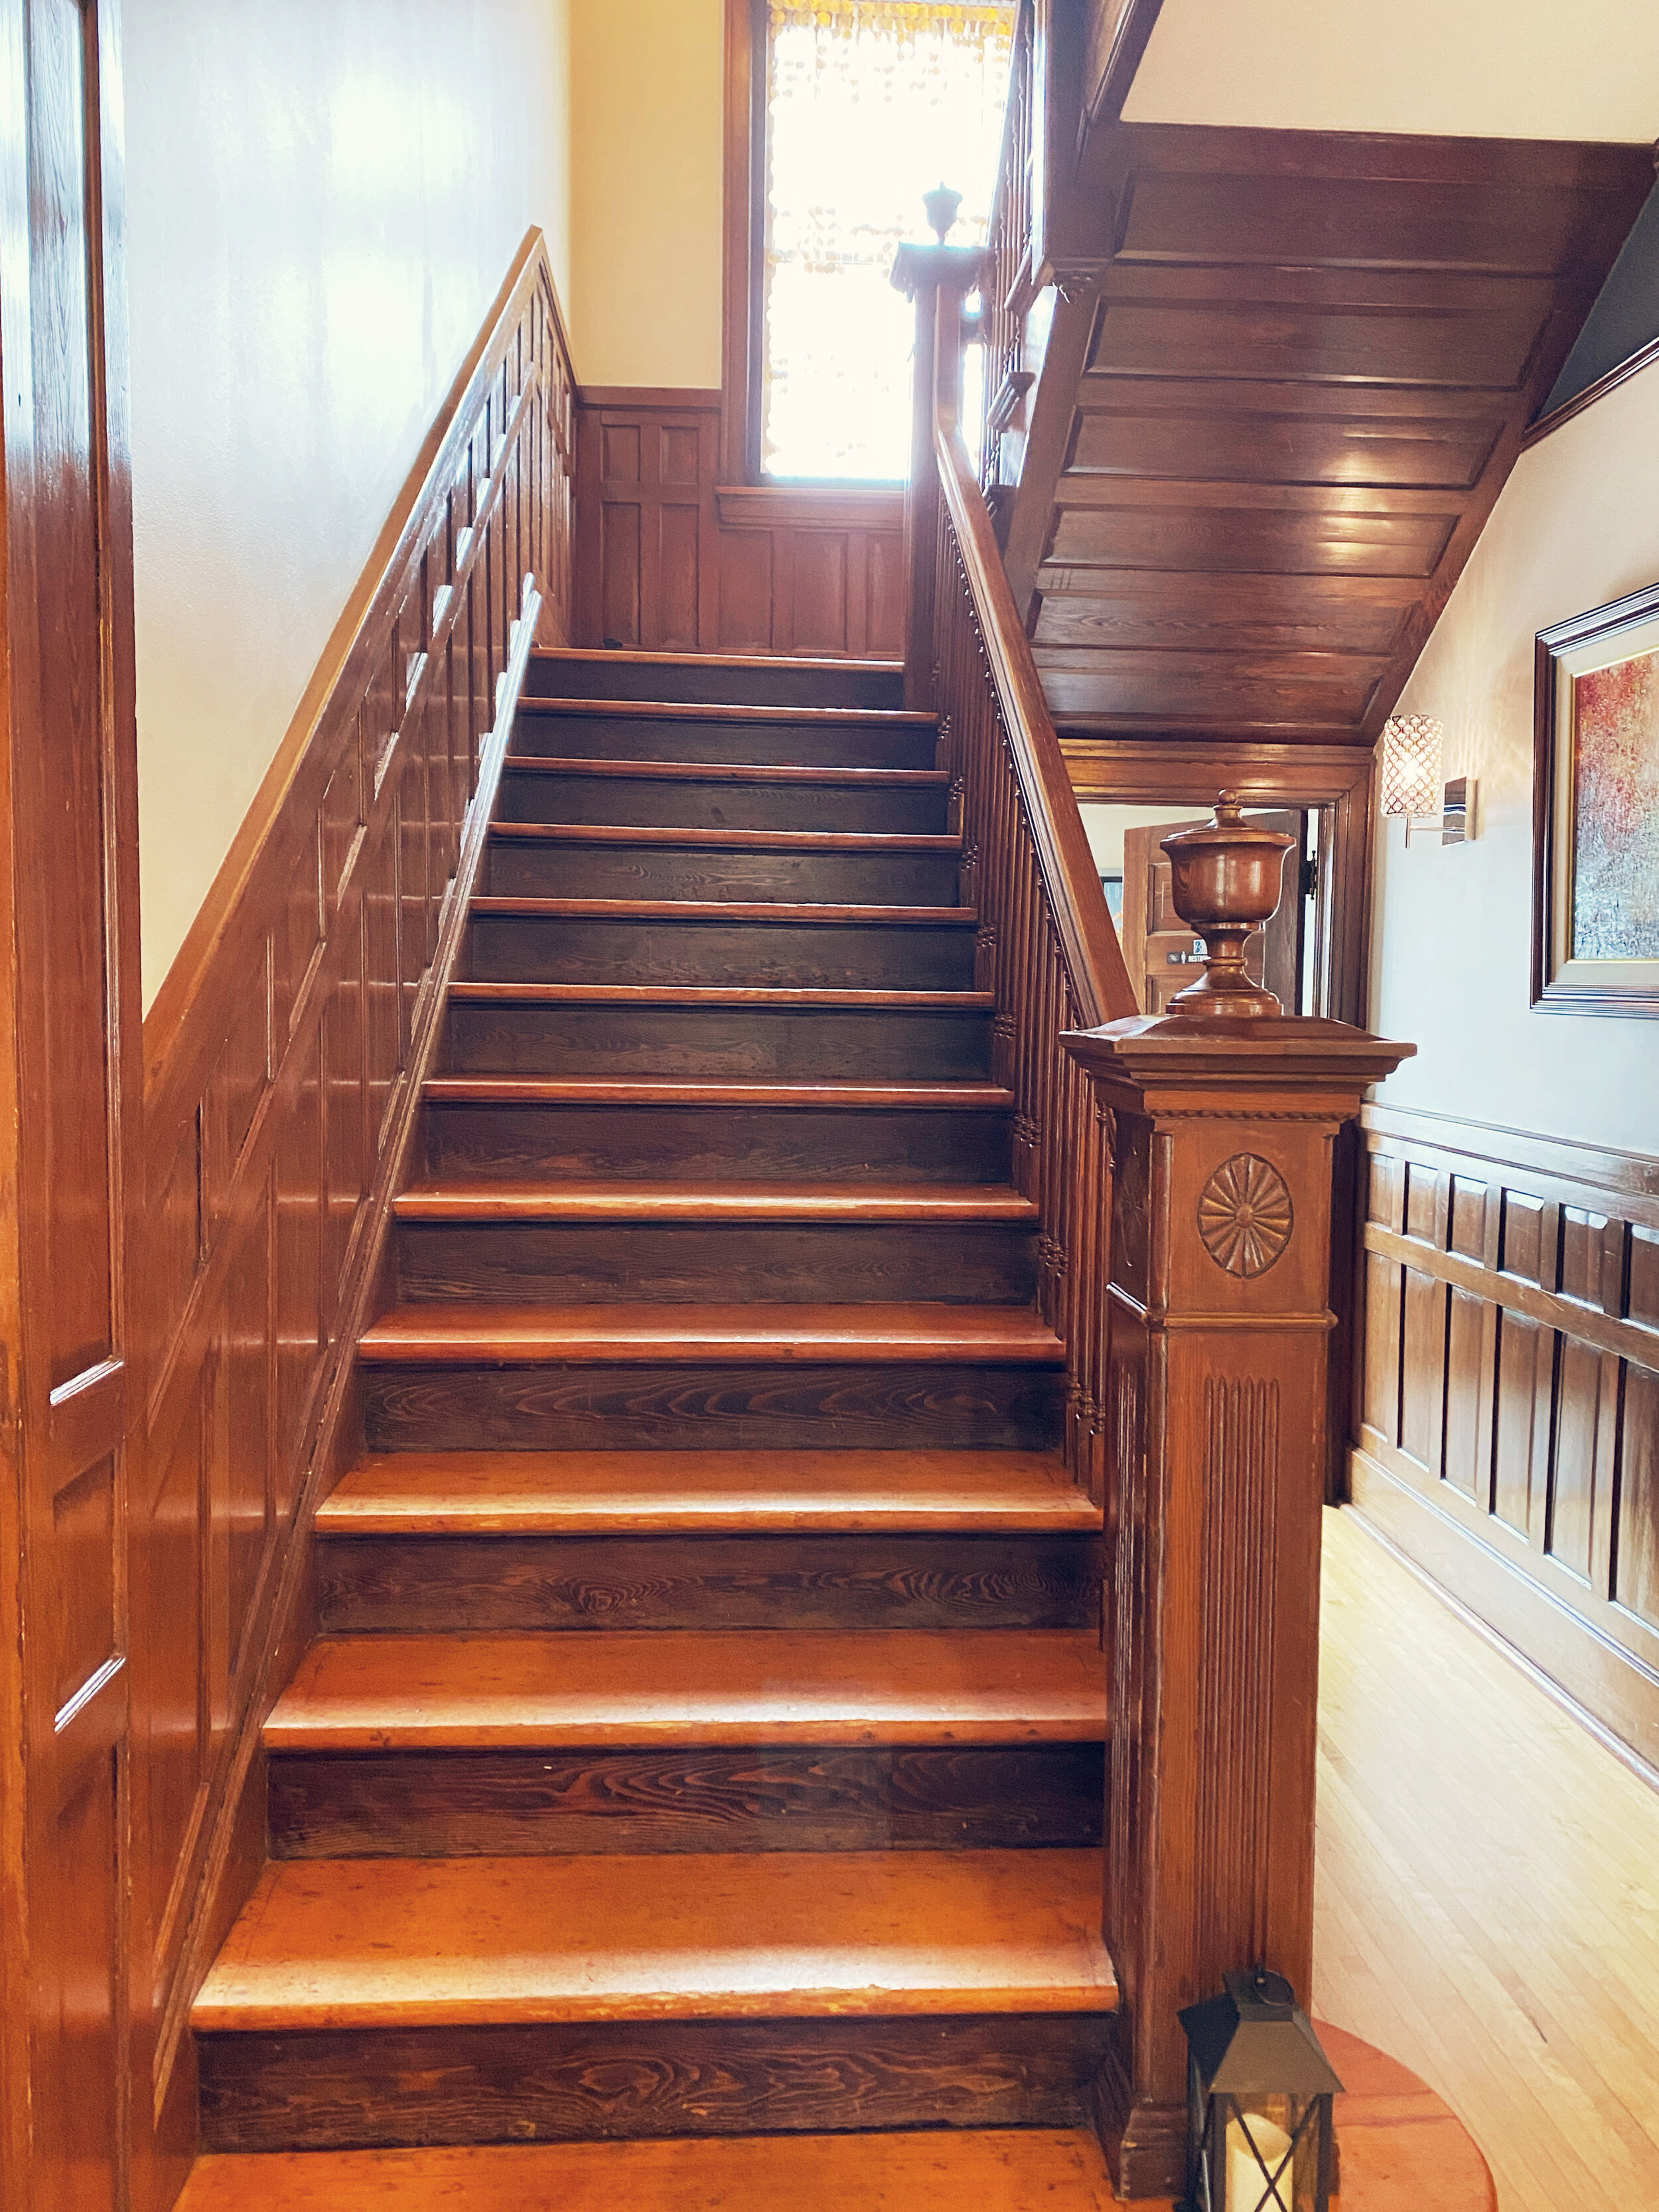 Grand staircase in the Blackwell Boutique Hotel in Coeur d'Alene, ID